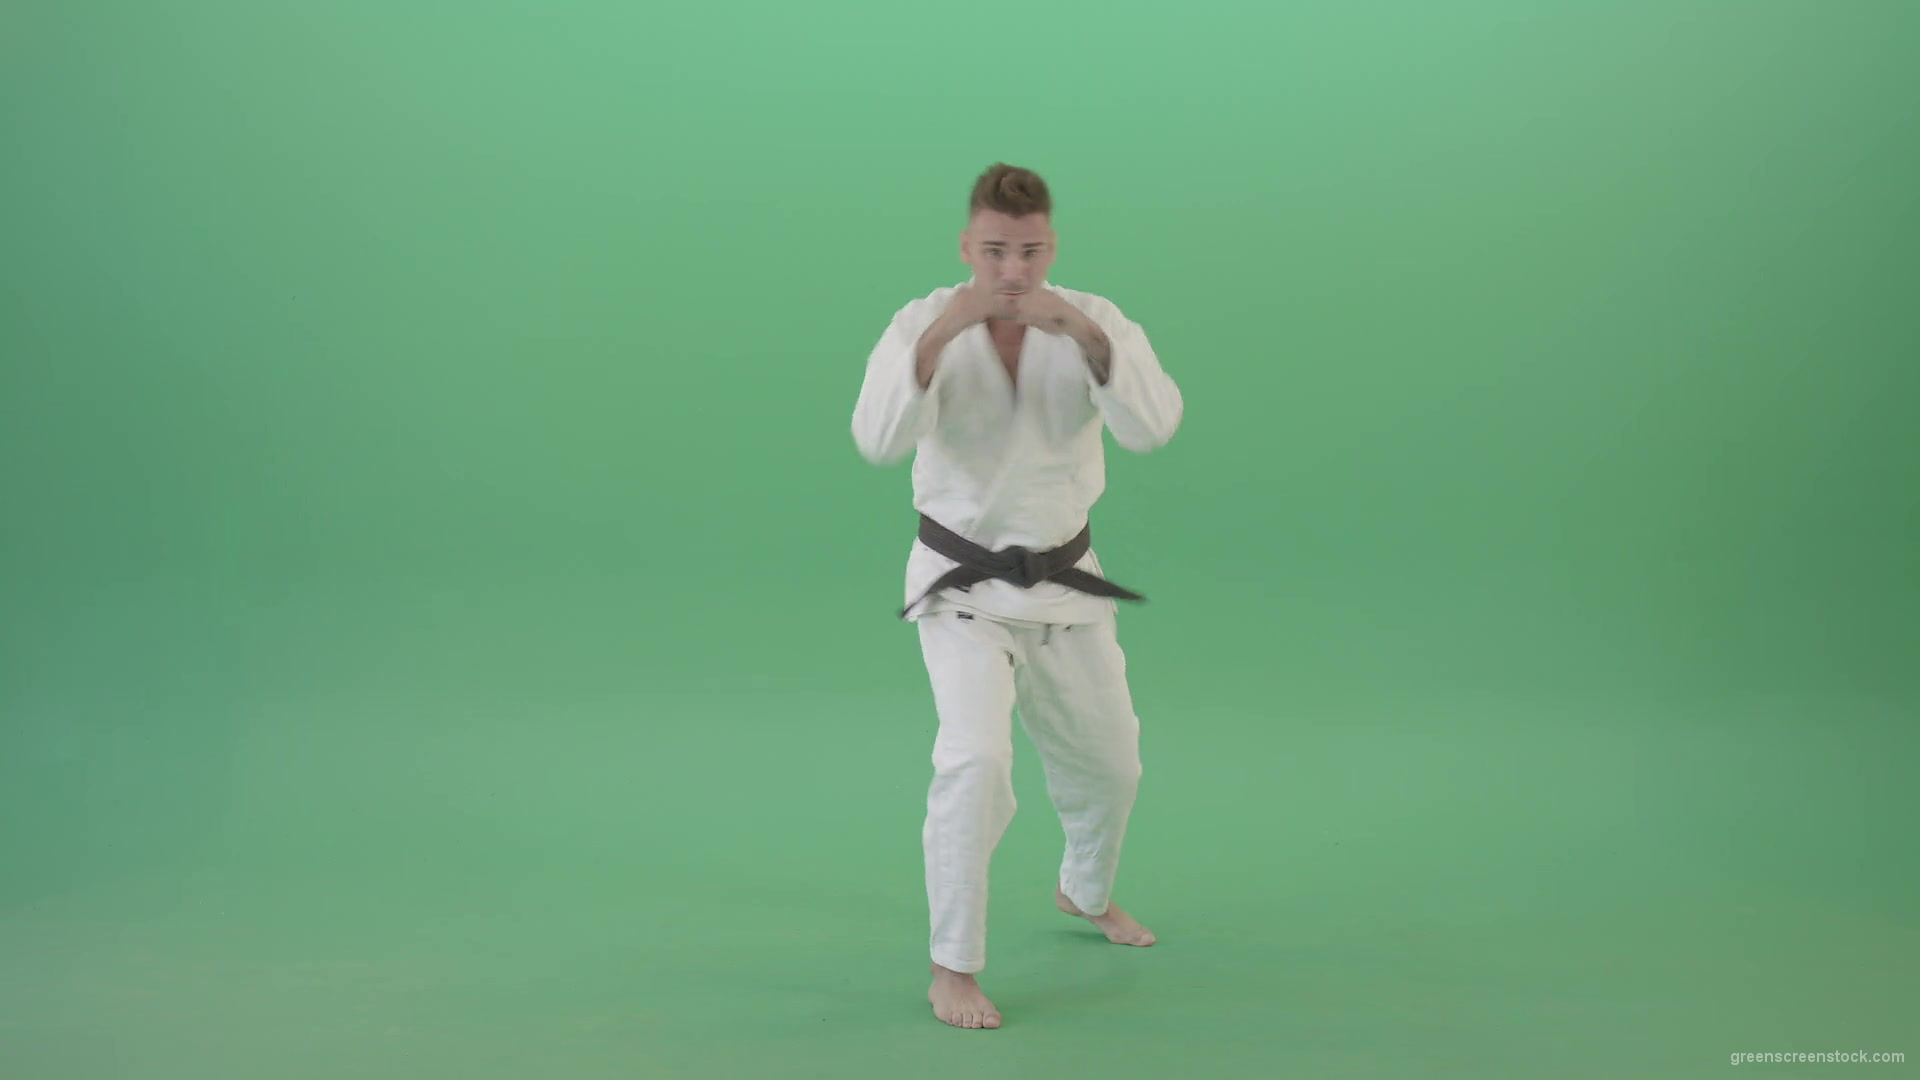 Karate-Man-boxing-making-punch-front-view-isolated-on-green-screen-1920_008 Green Screen Stock